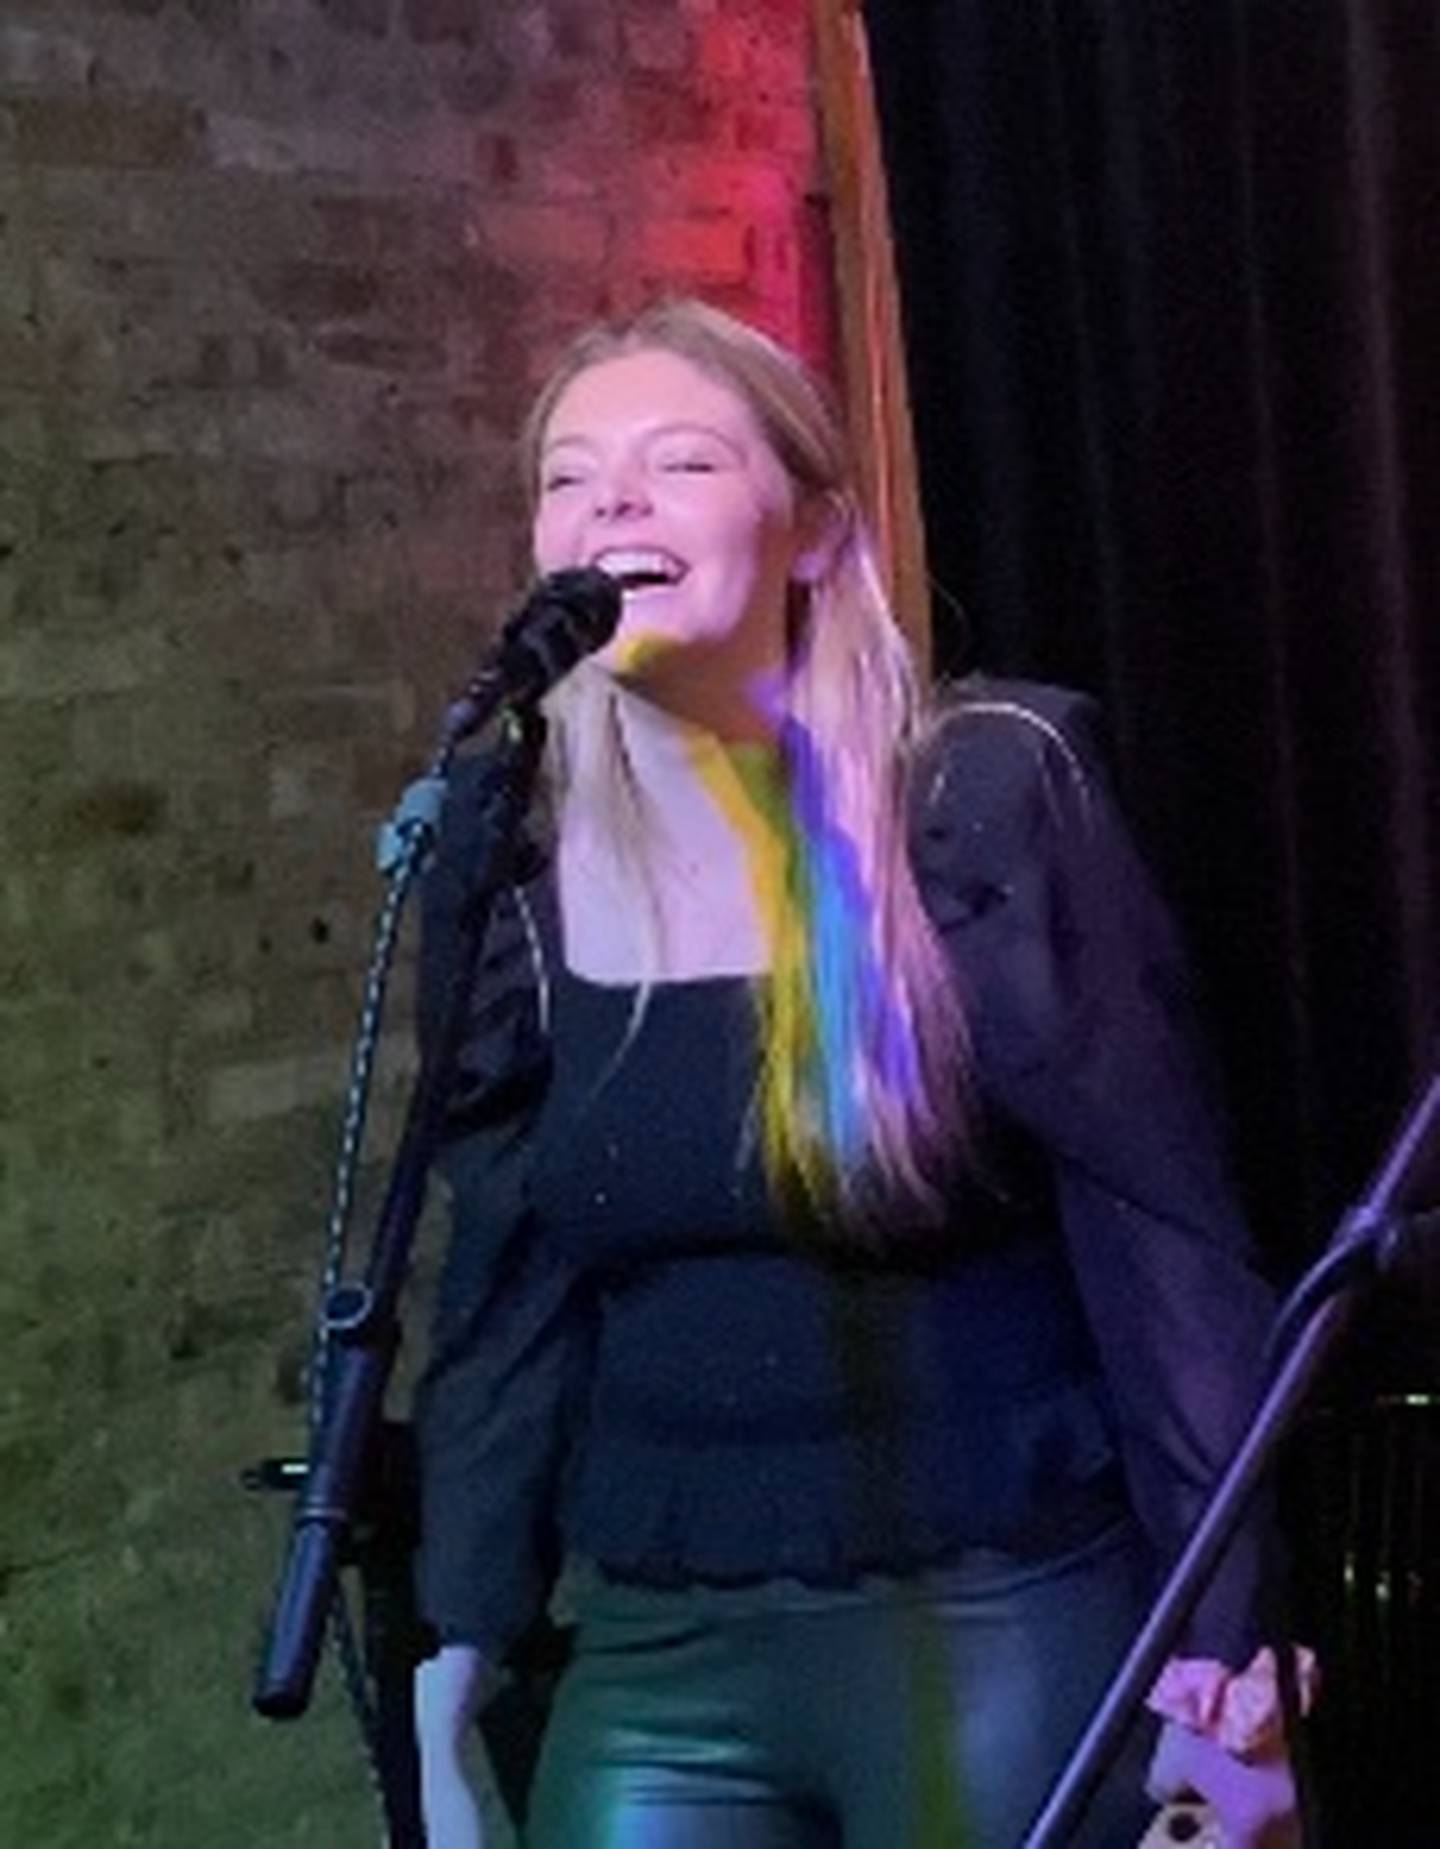 Five songwriters currently living in Nashville will perform their original songs on April 25 at the University of St. Francis in Joliet as part of the Pindrop Songwriter Series Review. One of the songwriters is Katie Pederson, pictured above.